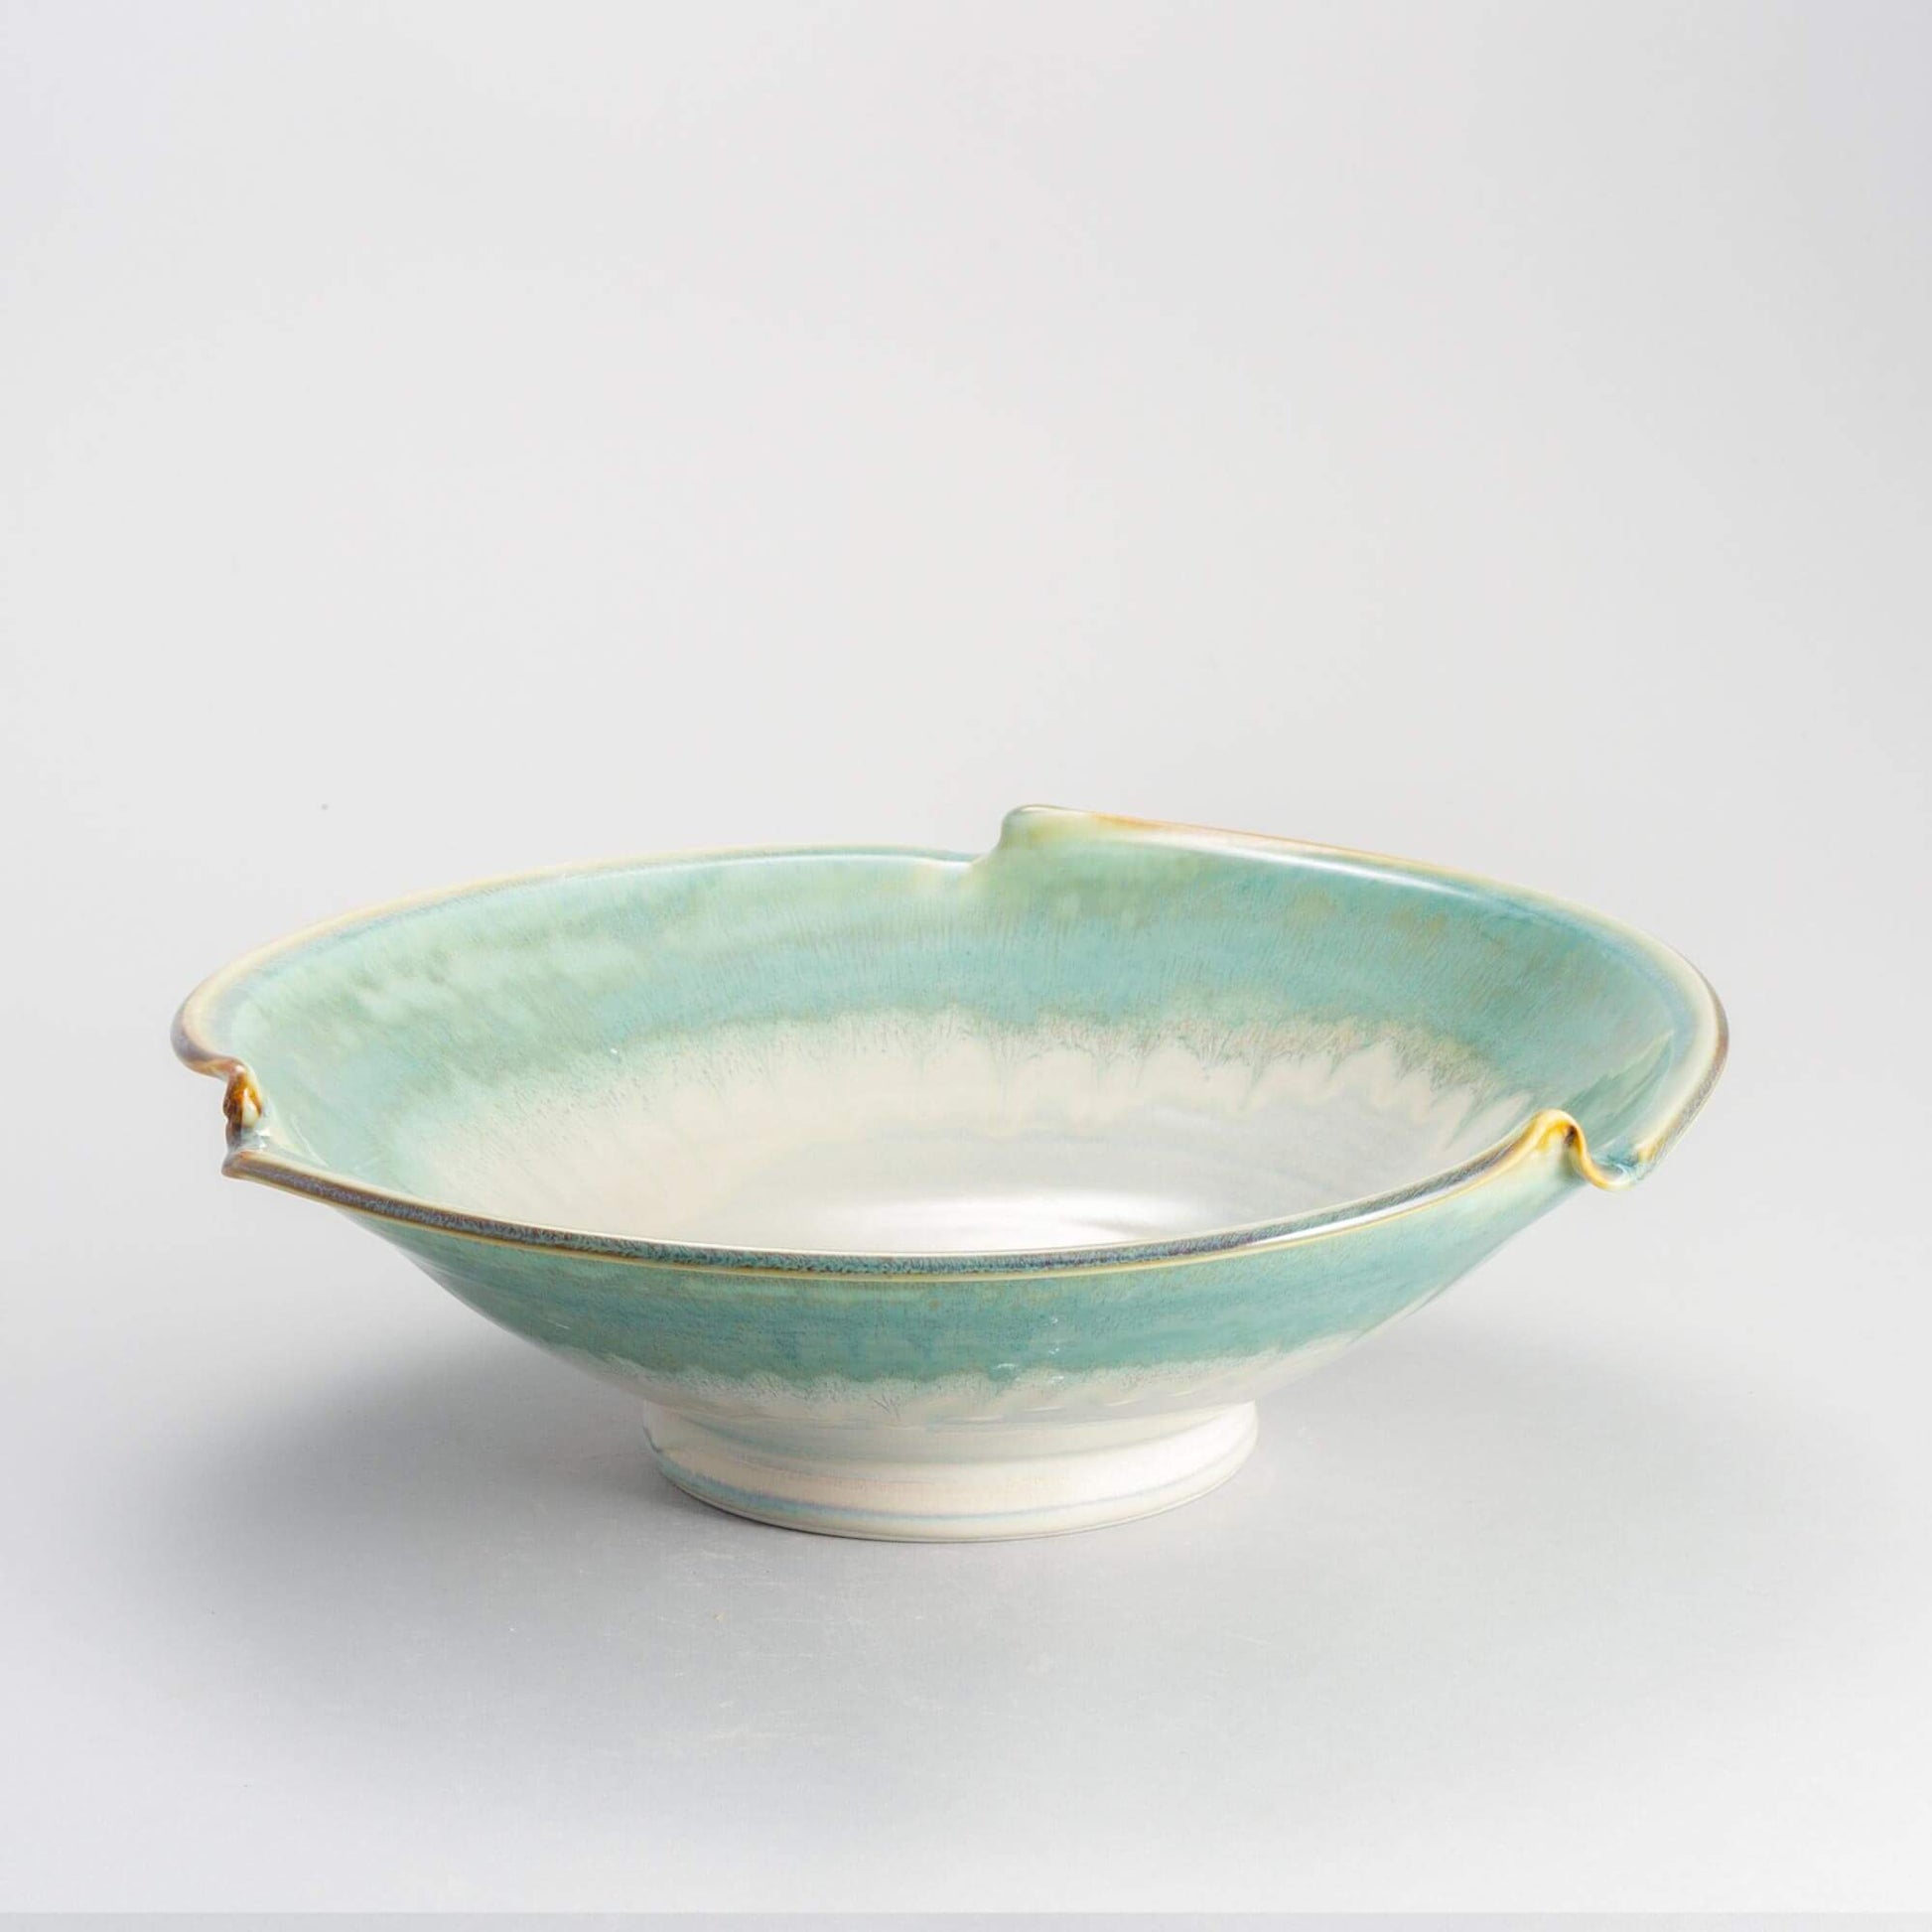 Handmade Pottery Signature Wave Bowl in Ivory & Green pattern made by Georgetown Pottery in Maine